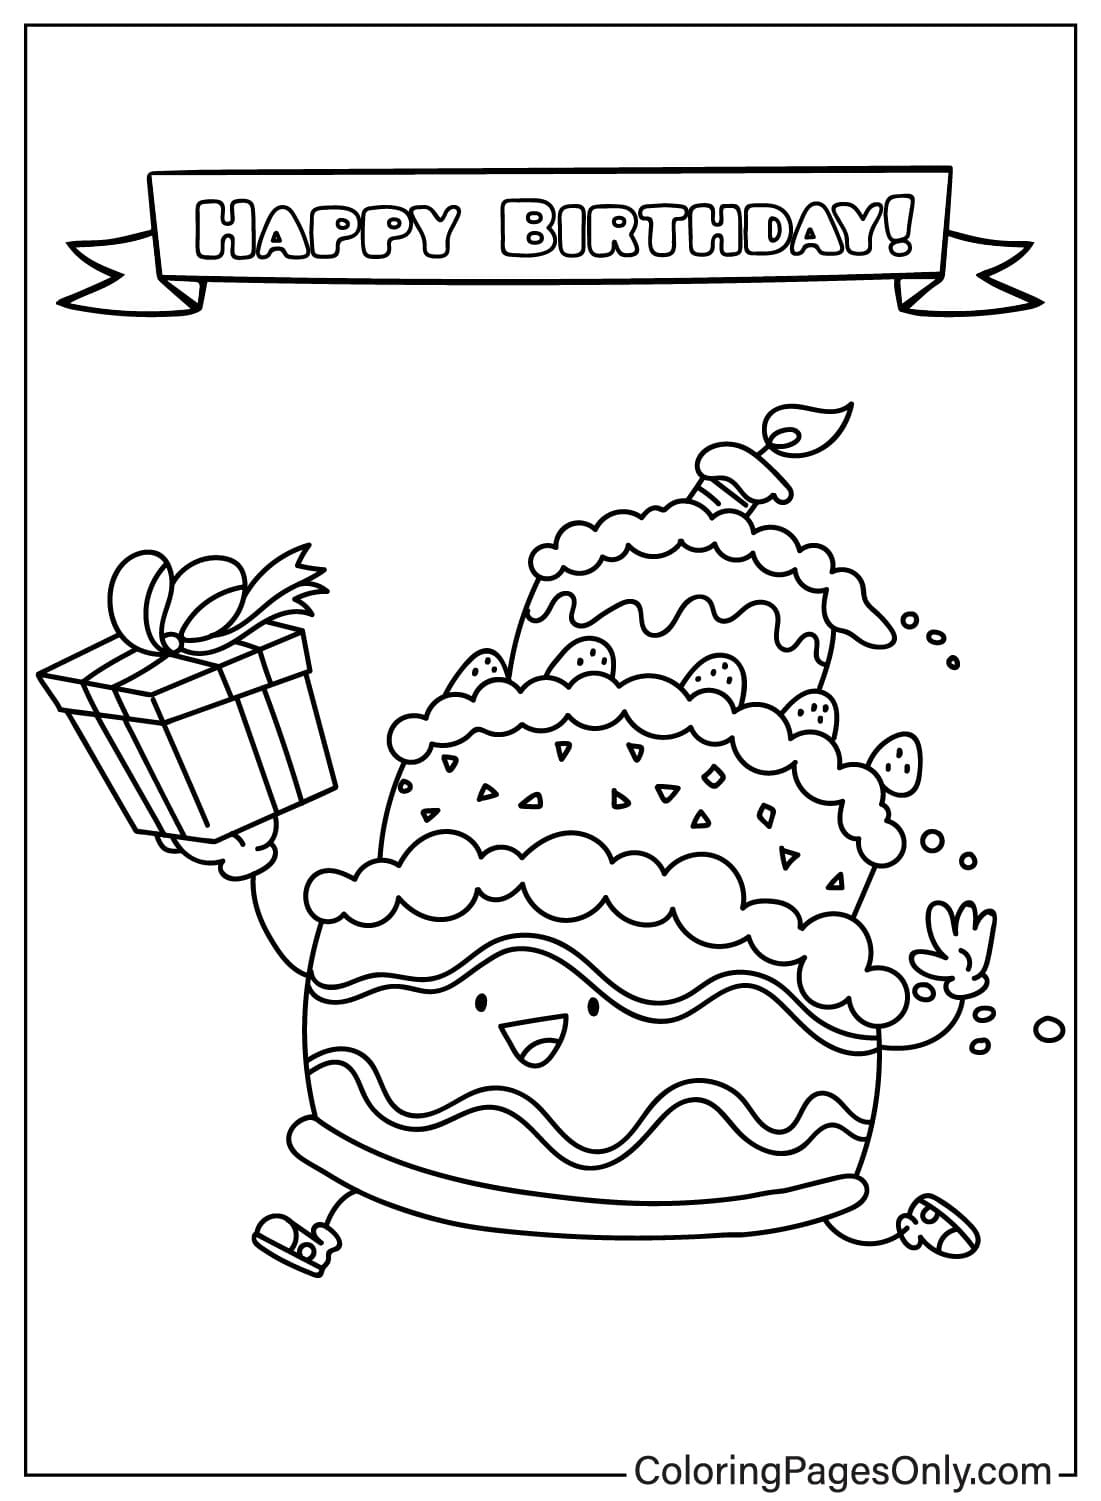 Birthday Cake Cute Coloring Page from Birthday Cake